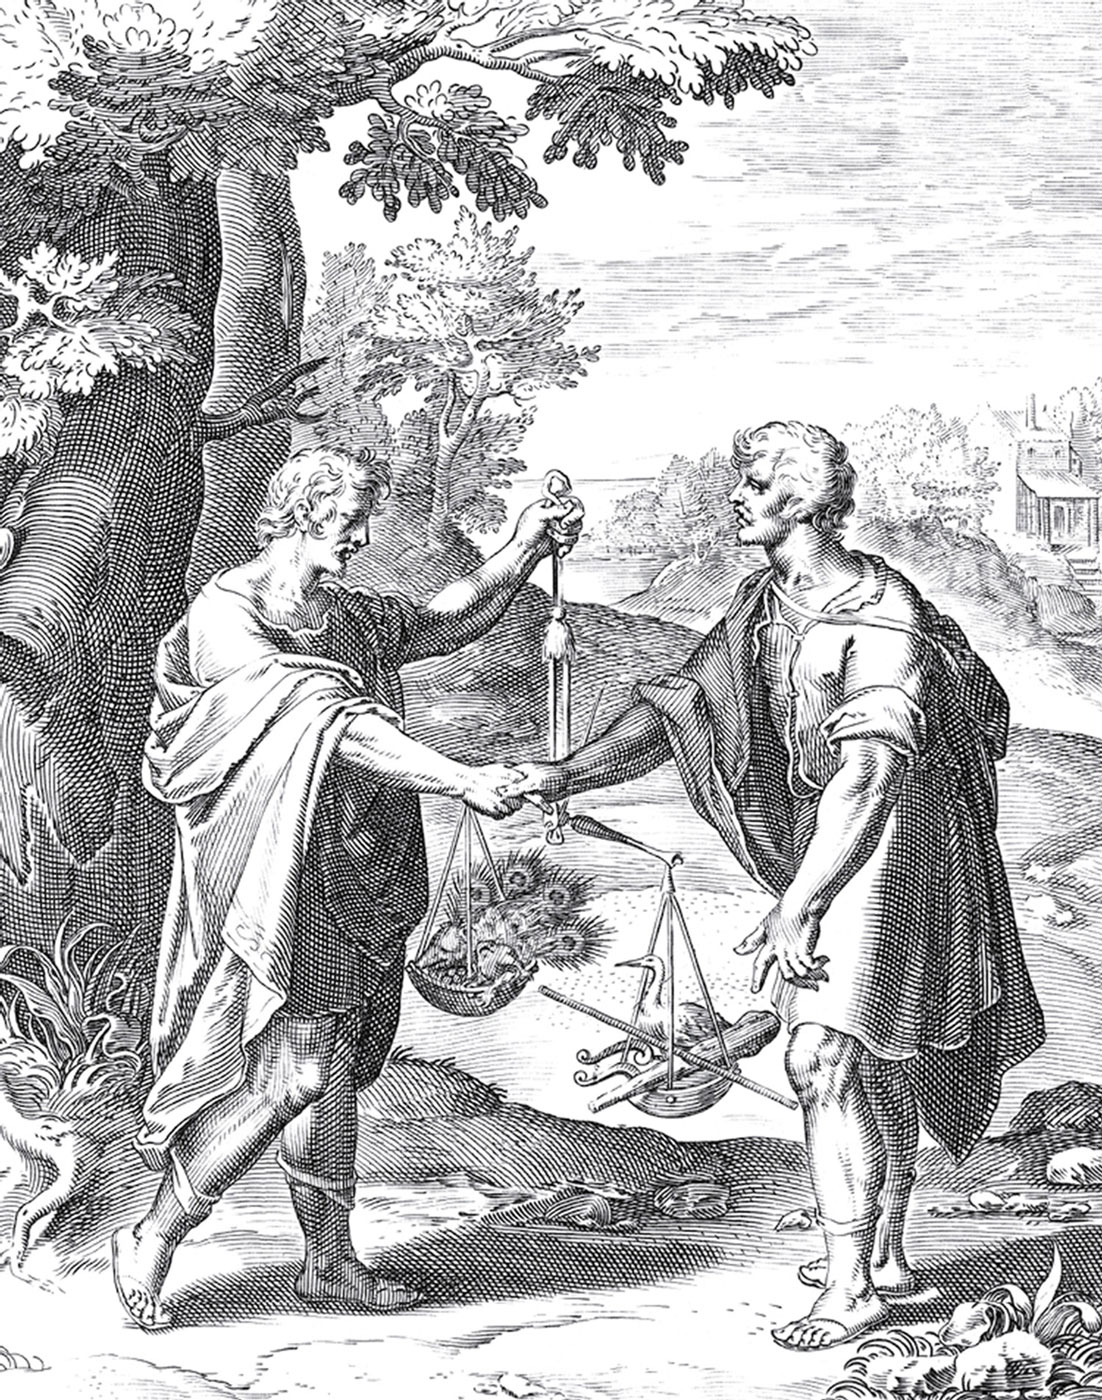 A drawing titled “Friendship in the Balance” from the 1612 edition of Flemish painter Otto Vaenius’s emblem book titled “Quinti Horatii Flacci Emblemata.”